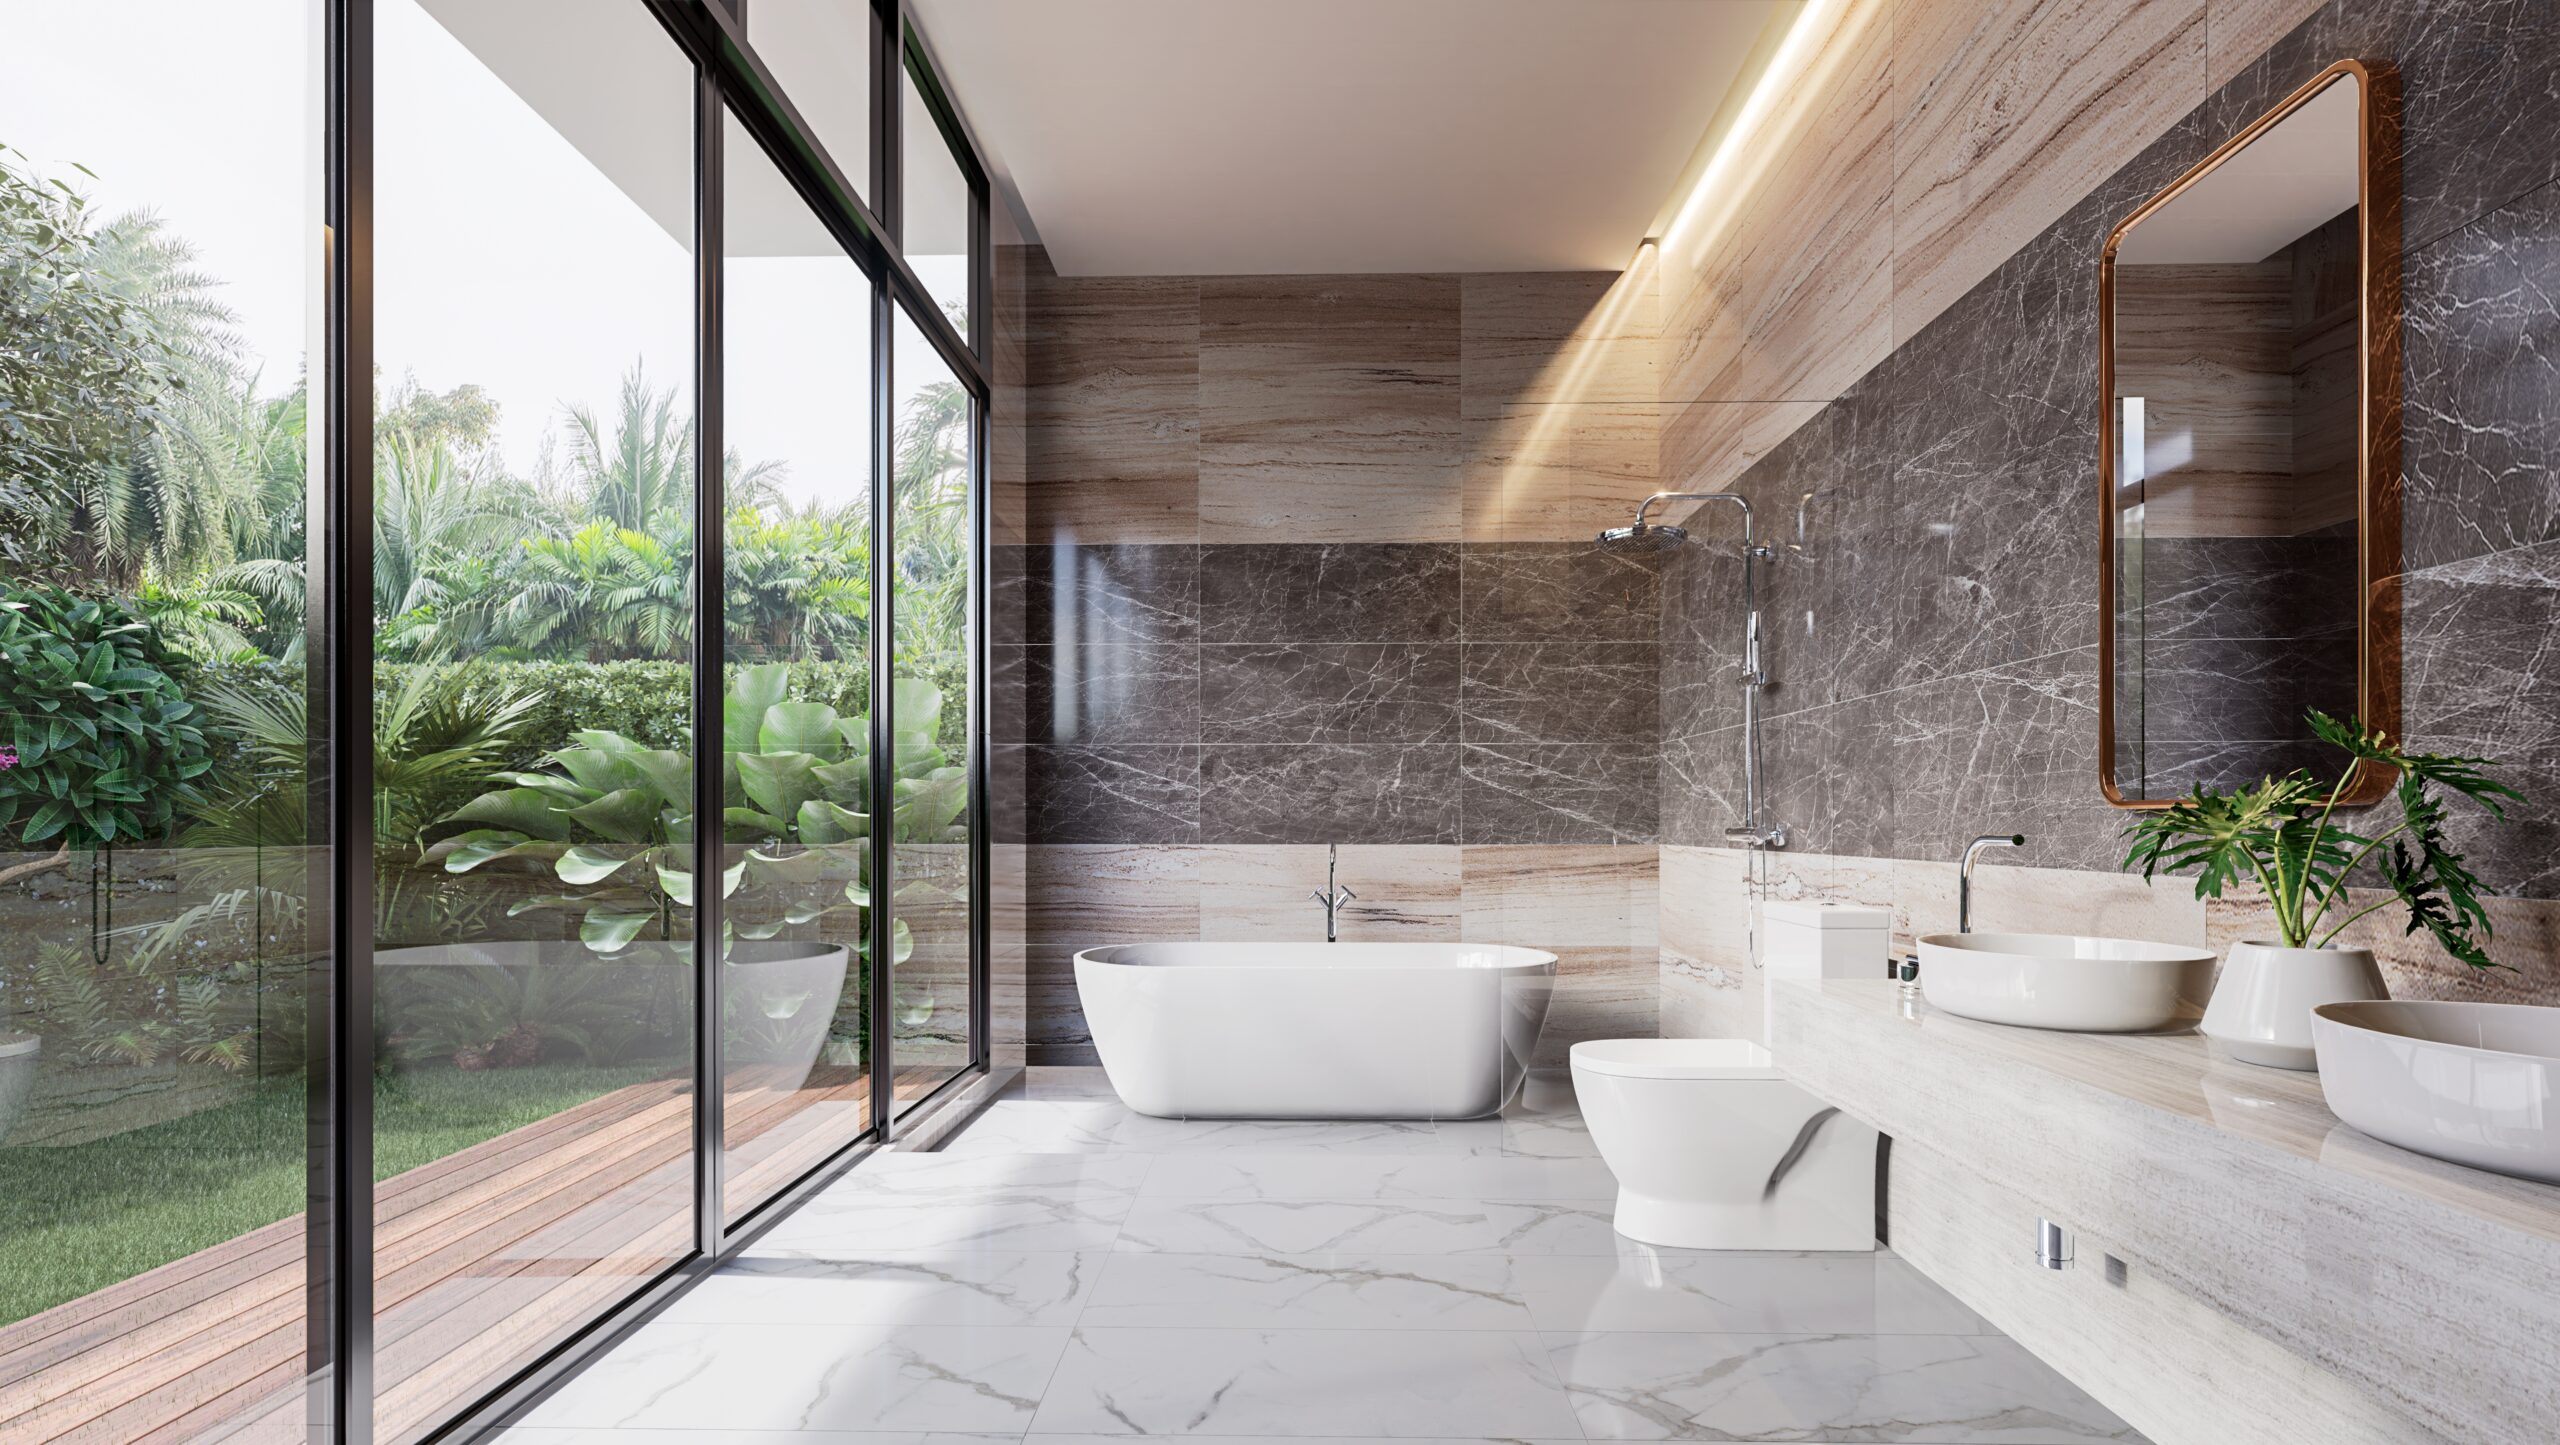 https://www.forbesglobalproperties.com/wp-content/uploads/2022/12/bathroom-scaled.jpg